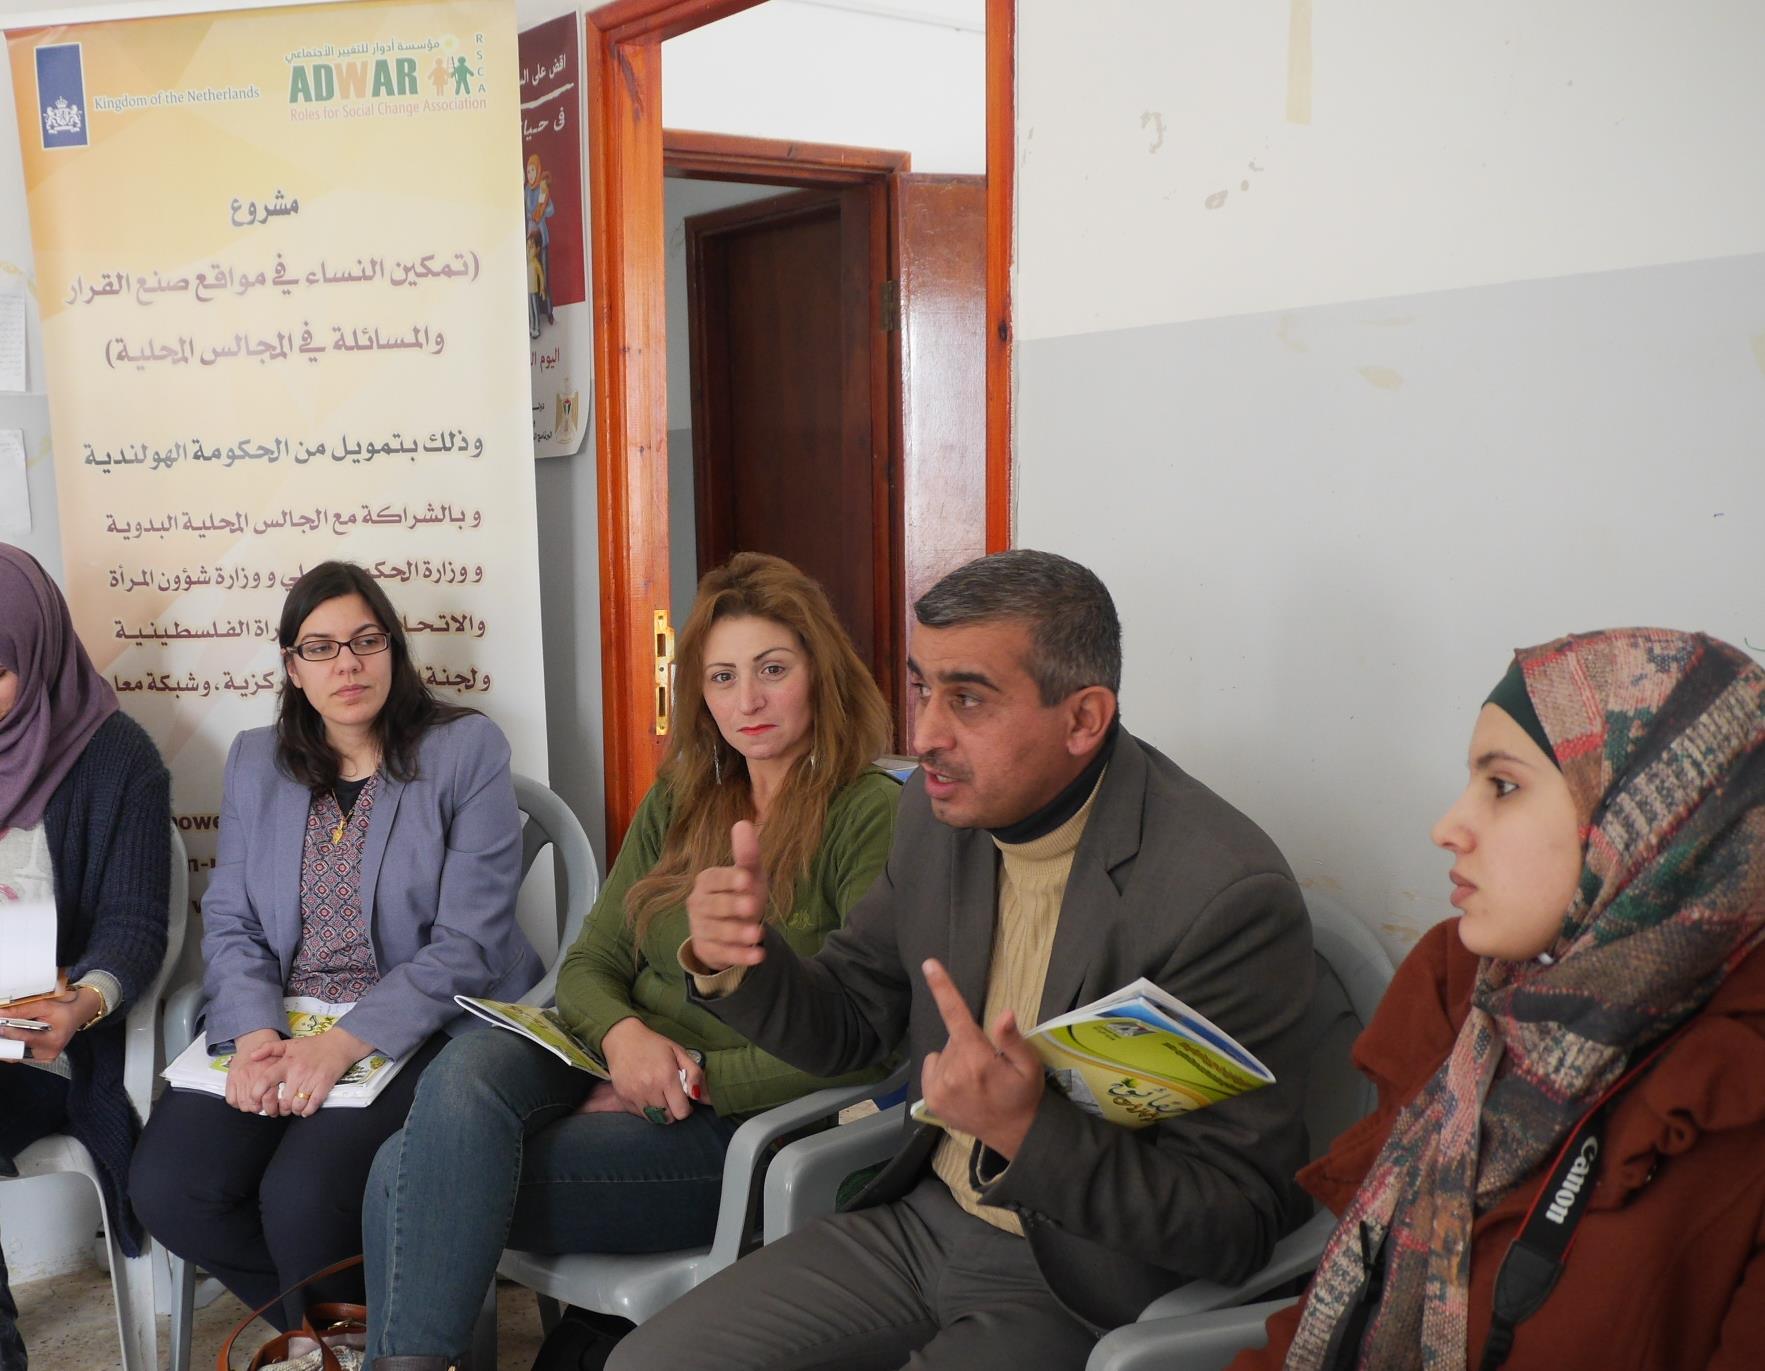  ADWAR continues implementing the activities of the project (Empowering Bedouin women in decision-making and accountability within local council’s)